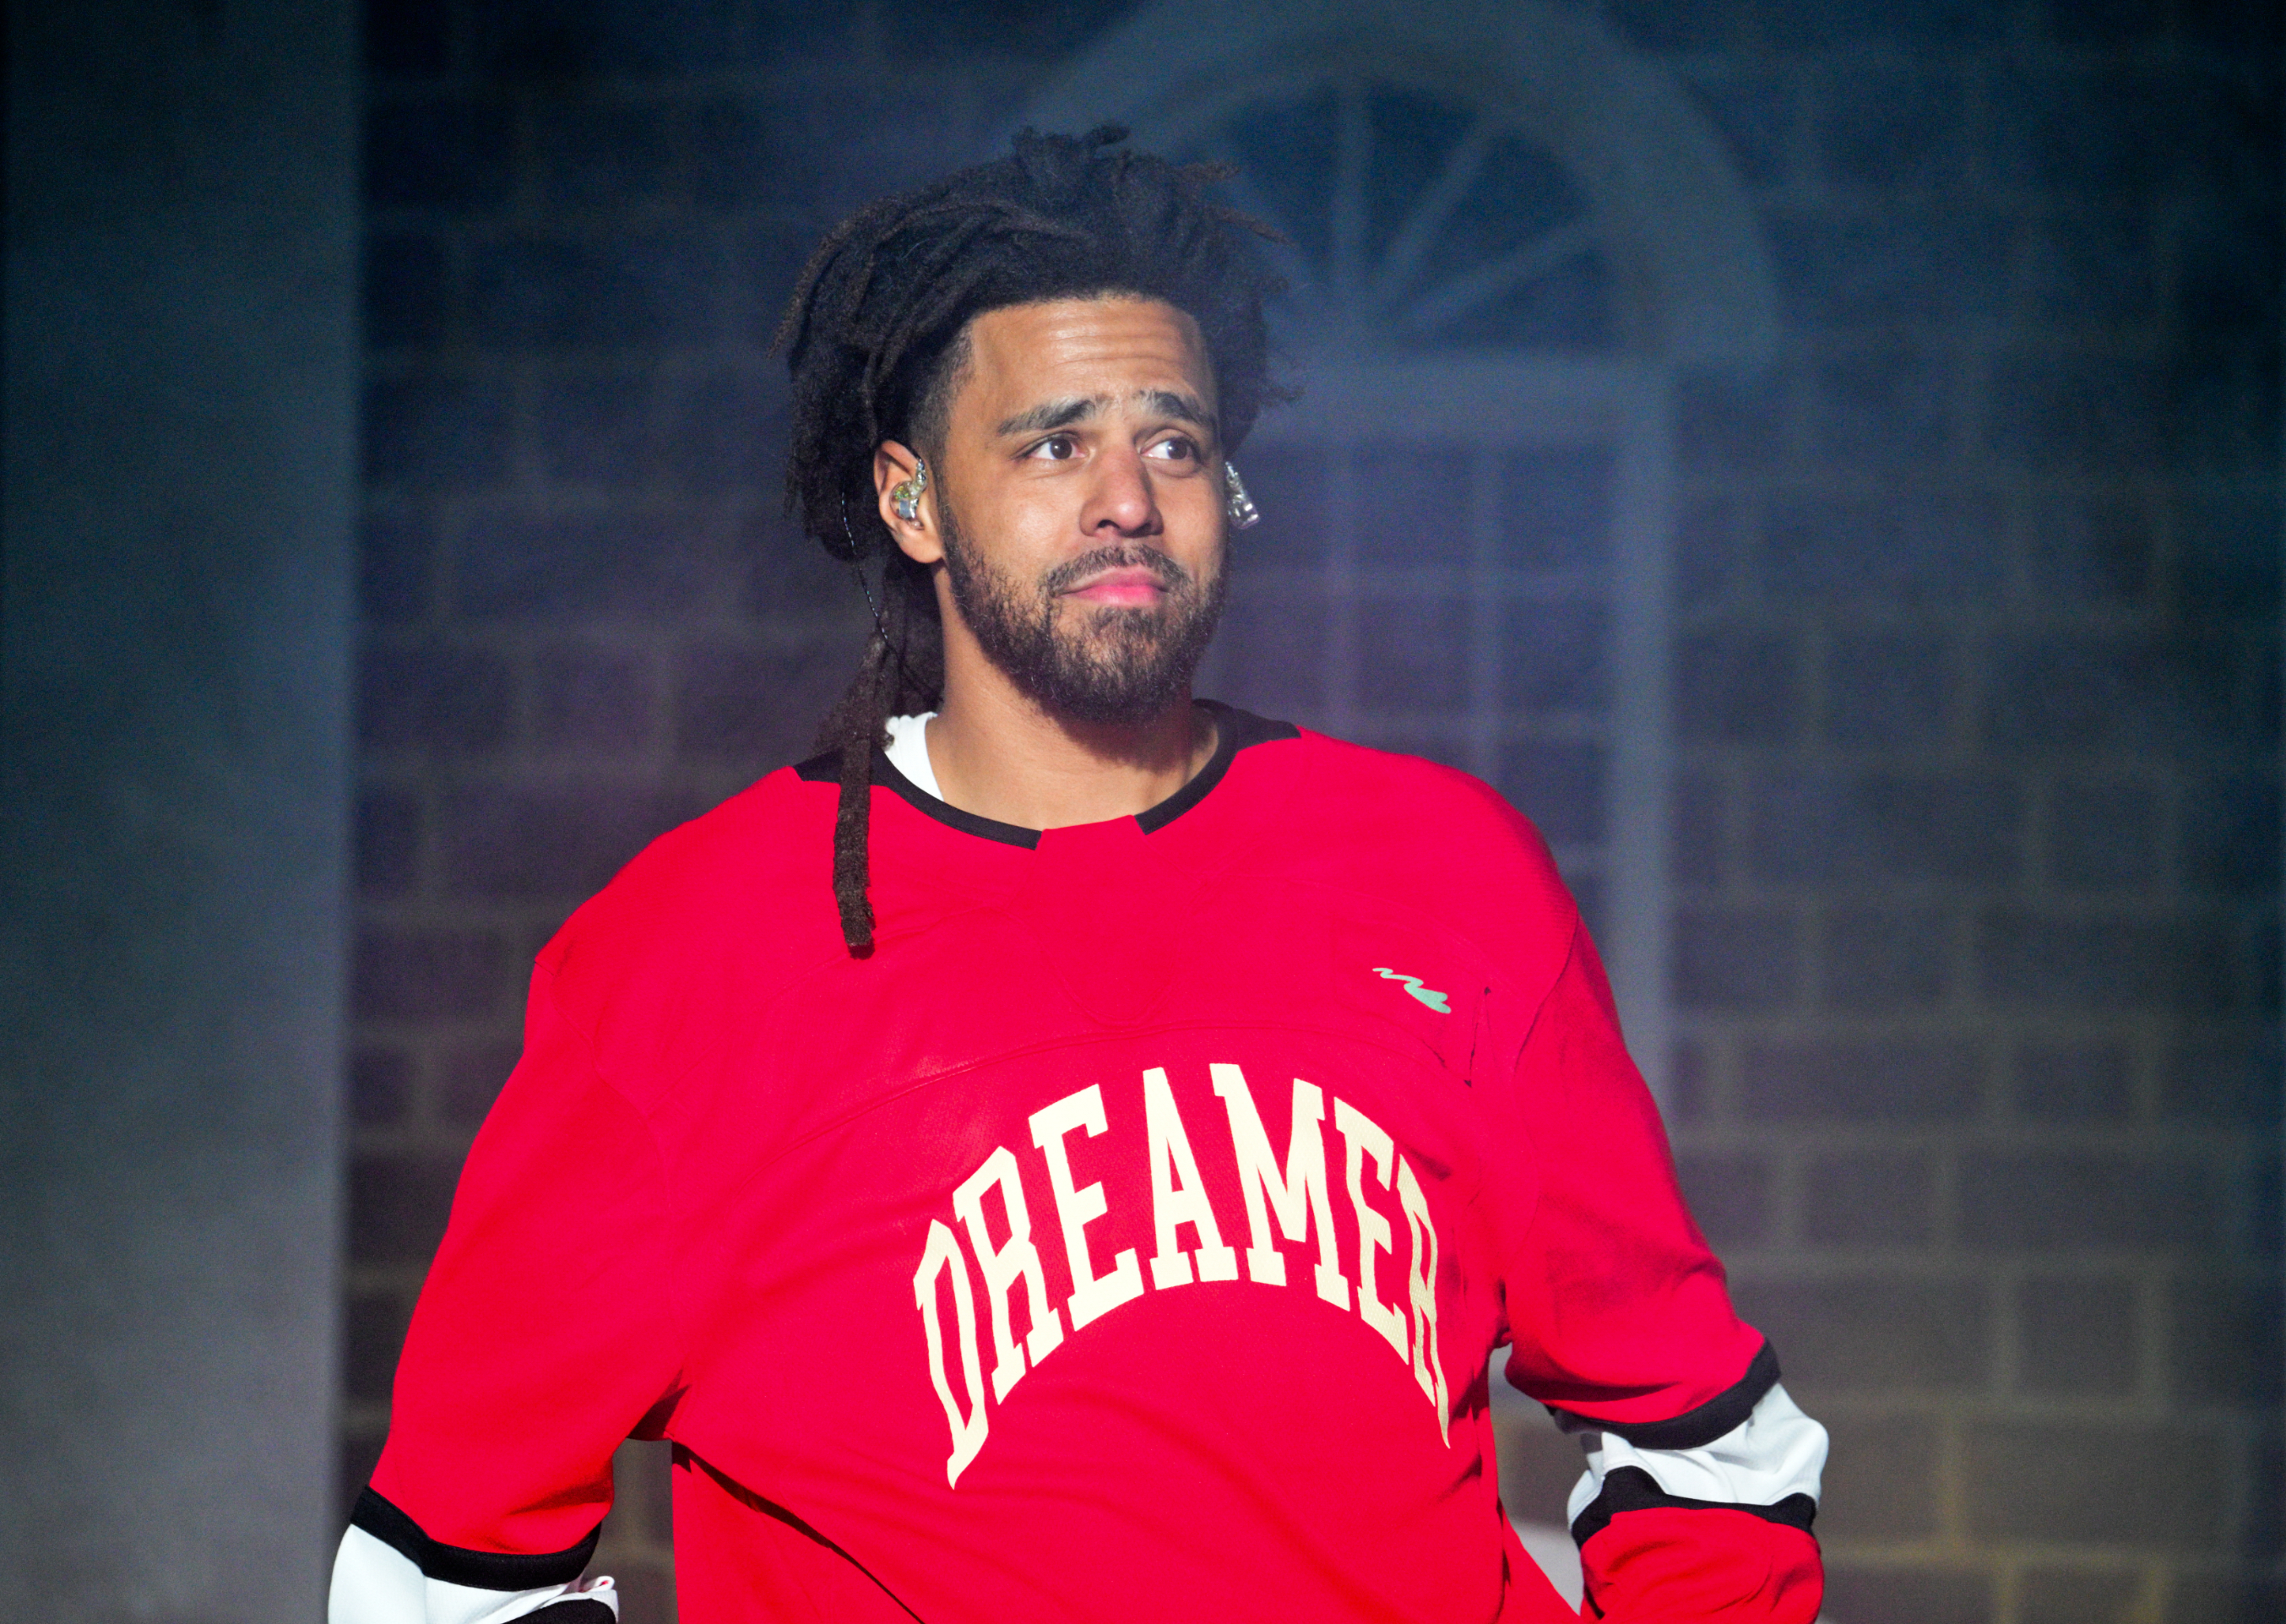 J. Cole on stage wearing a &quot;Dreamer&quot; jersey, performing during a concert